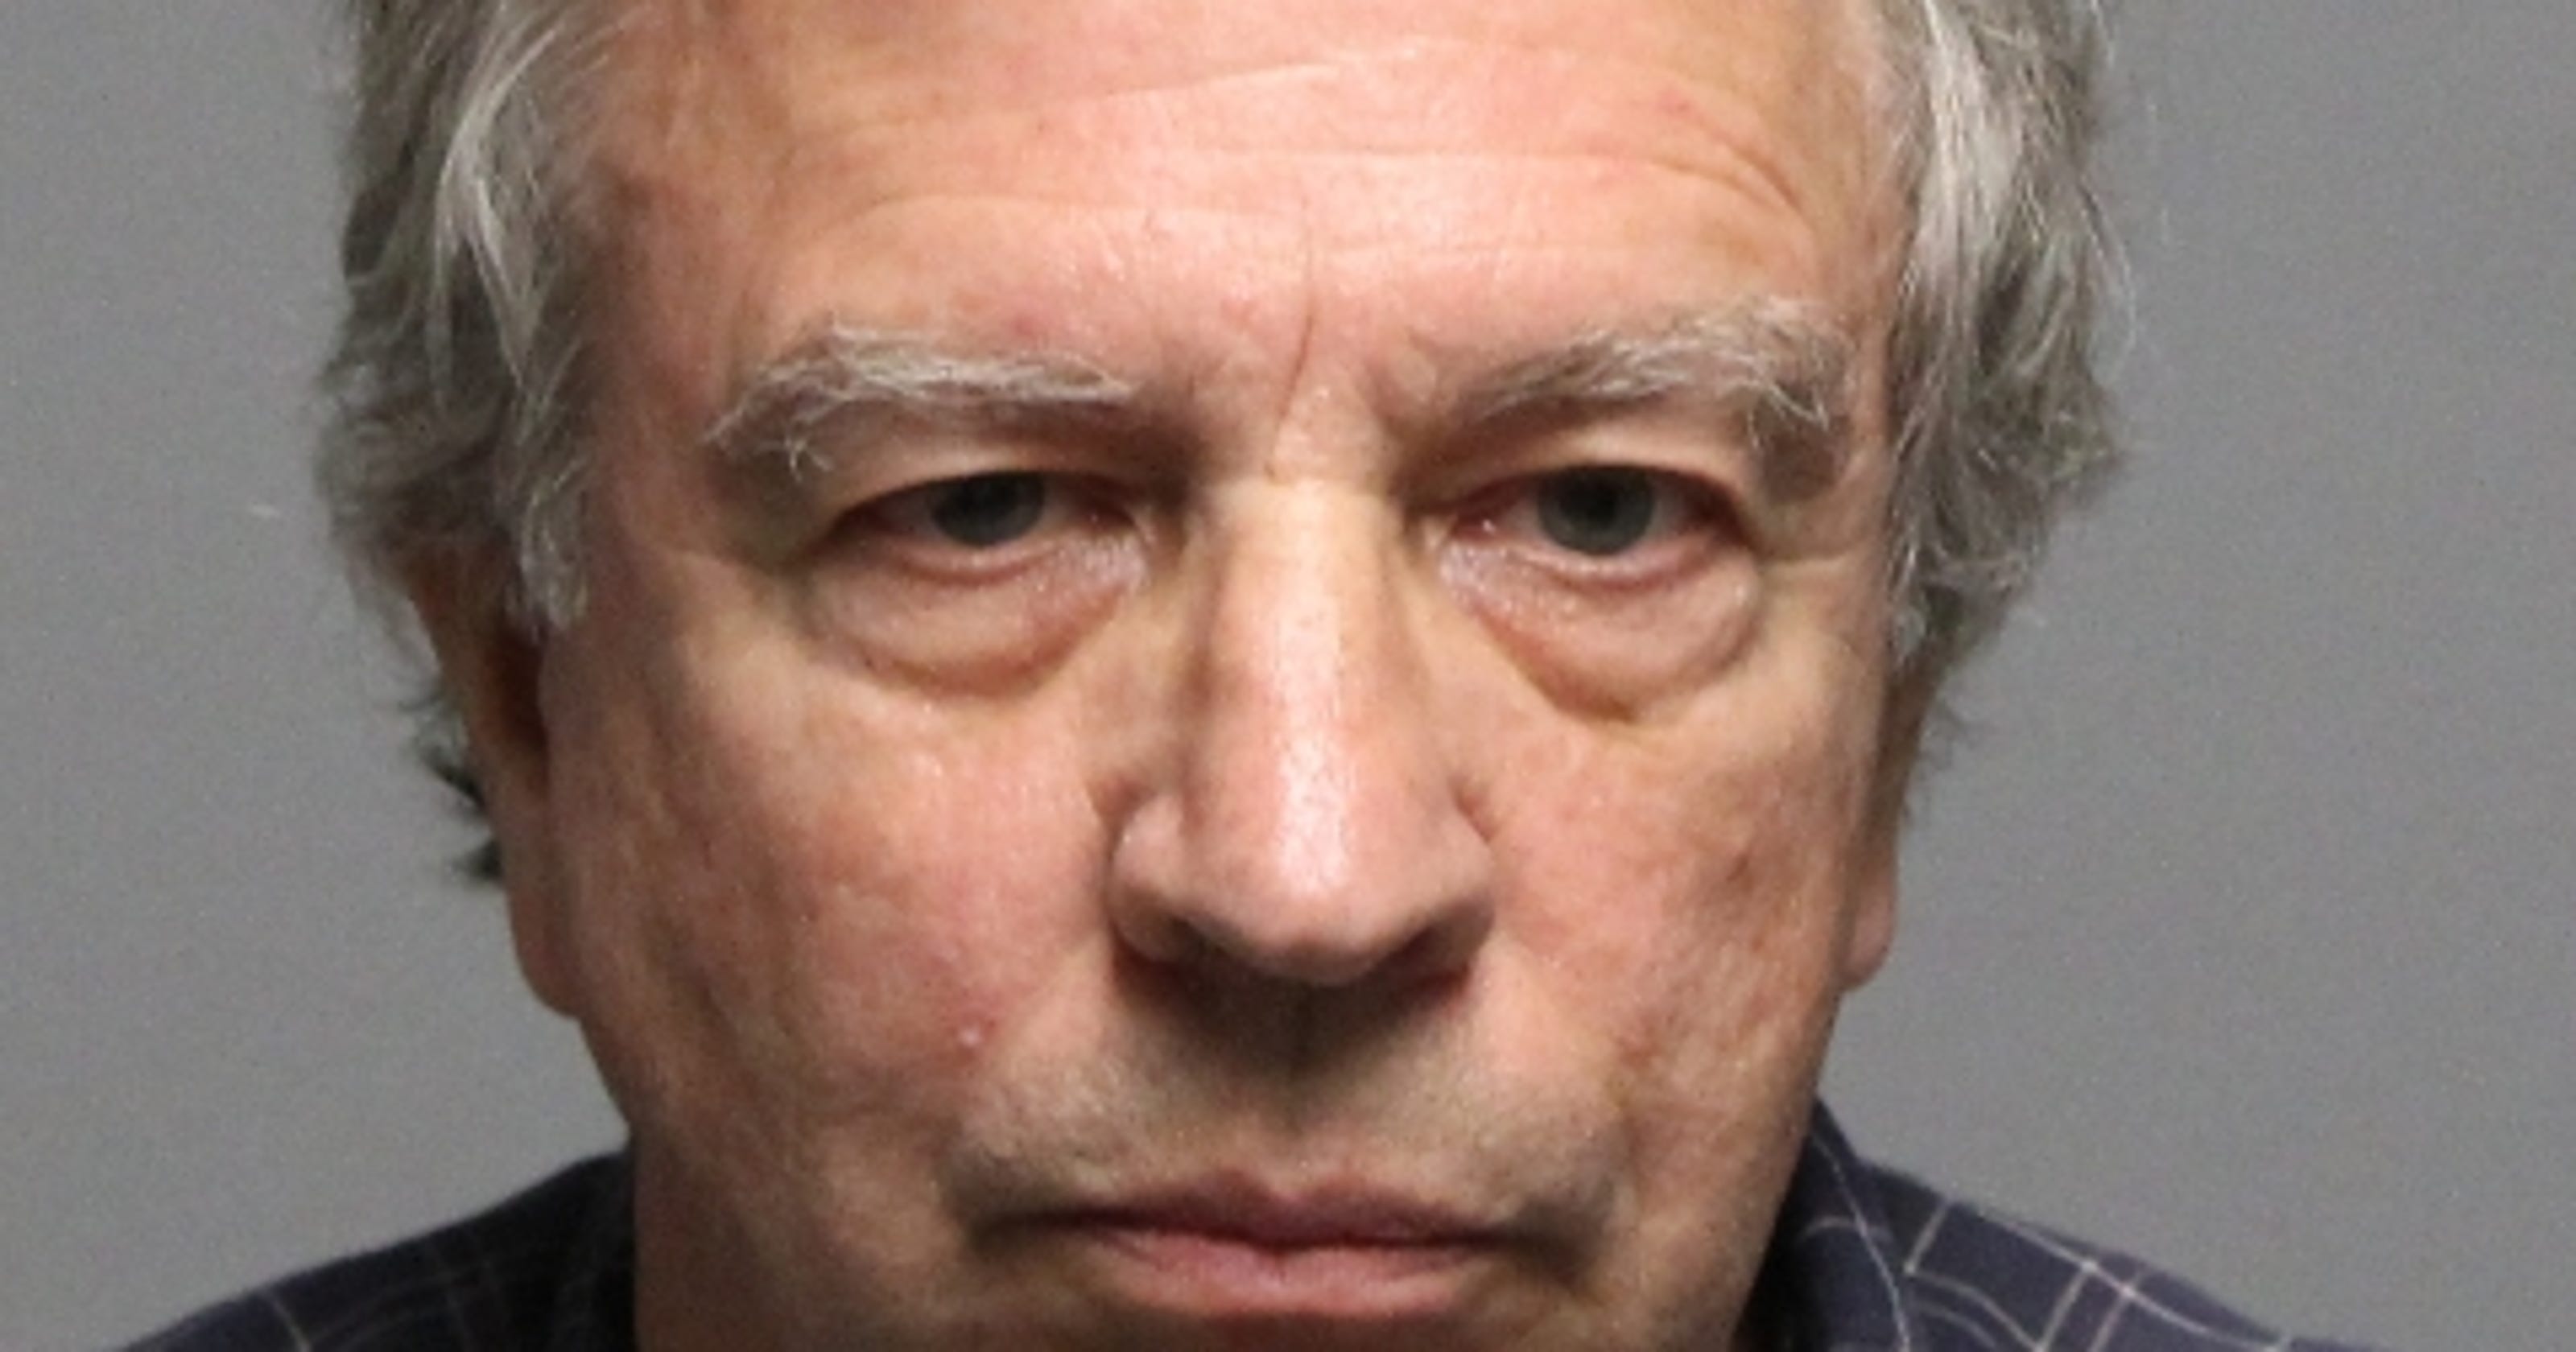 Hunterdon County NJ man, 70, charged with child porn possession